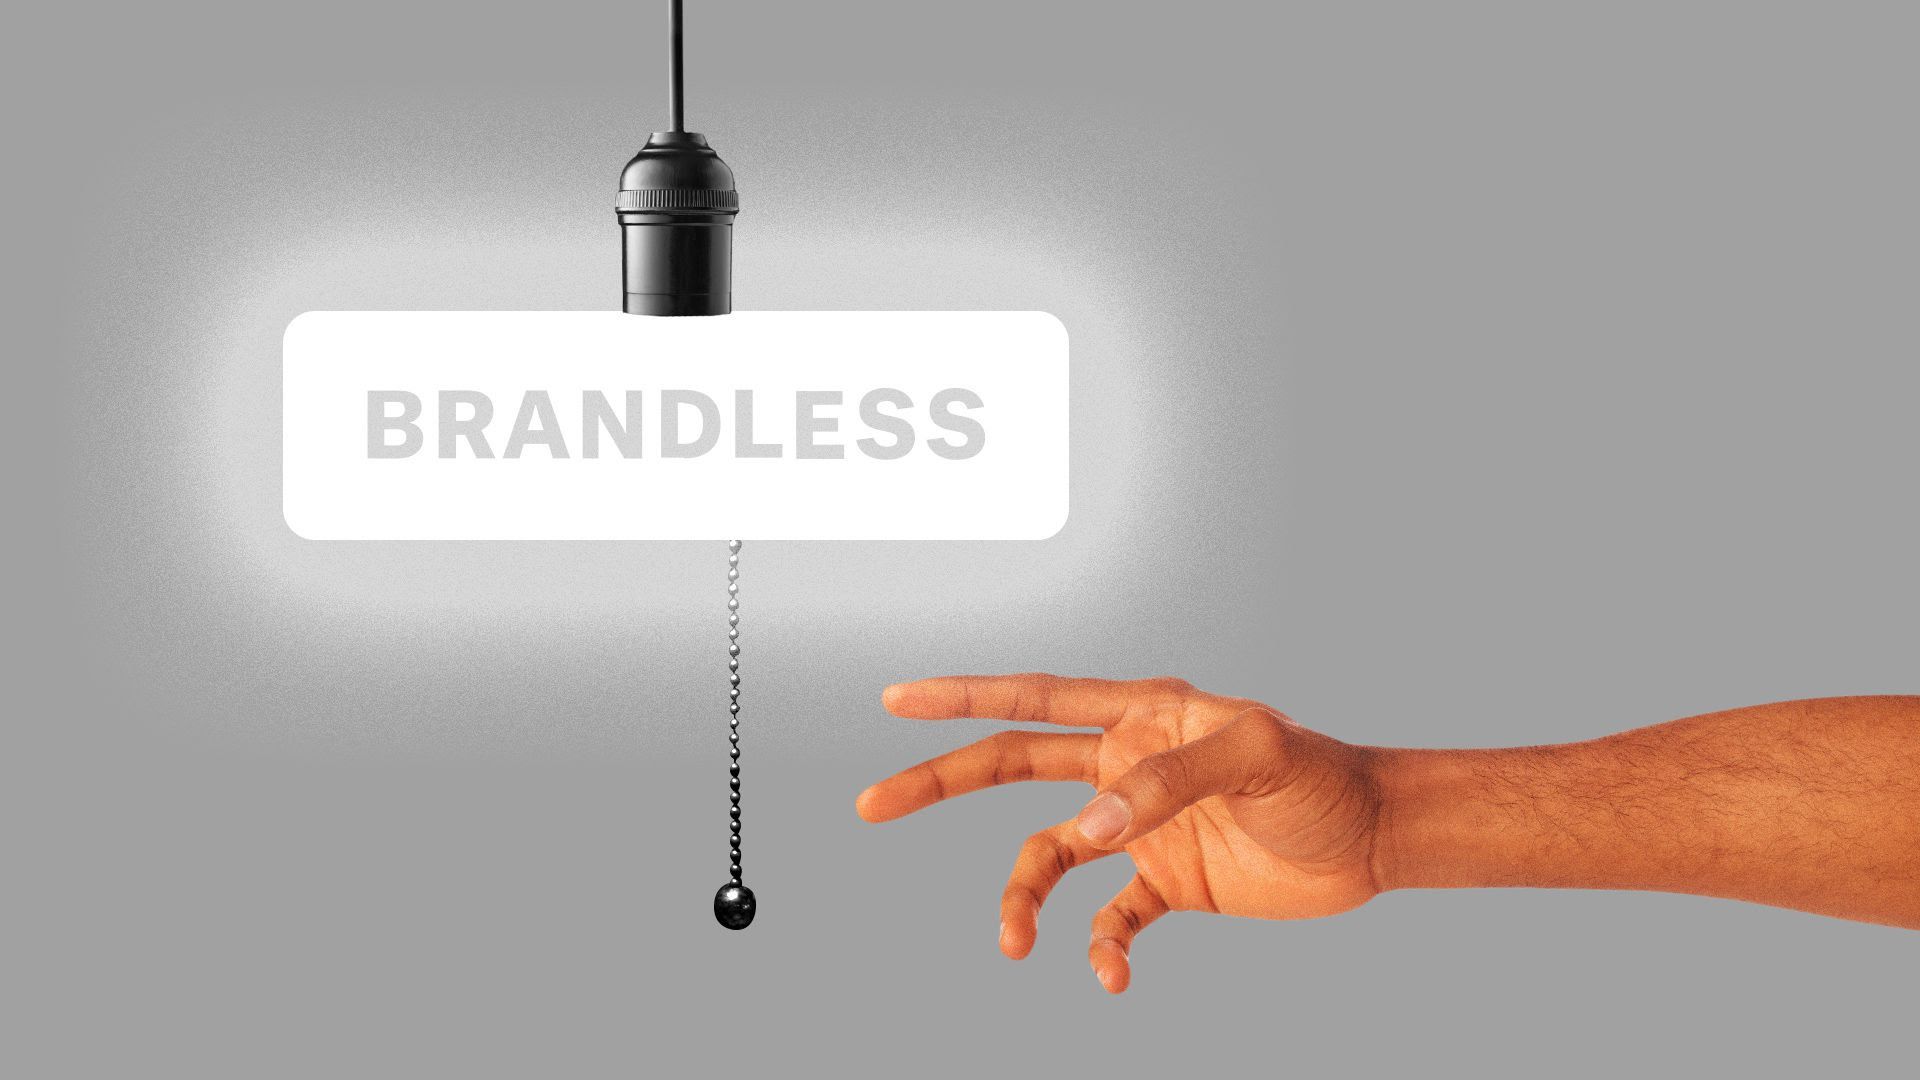 An illustration of the Brandless logo as a light that someone is shutting off.